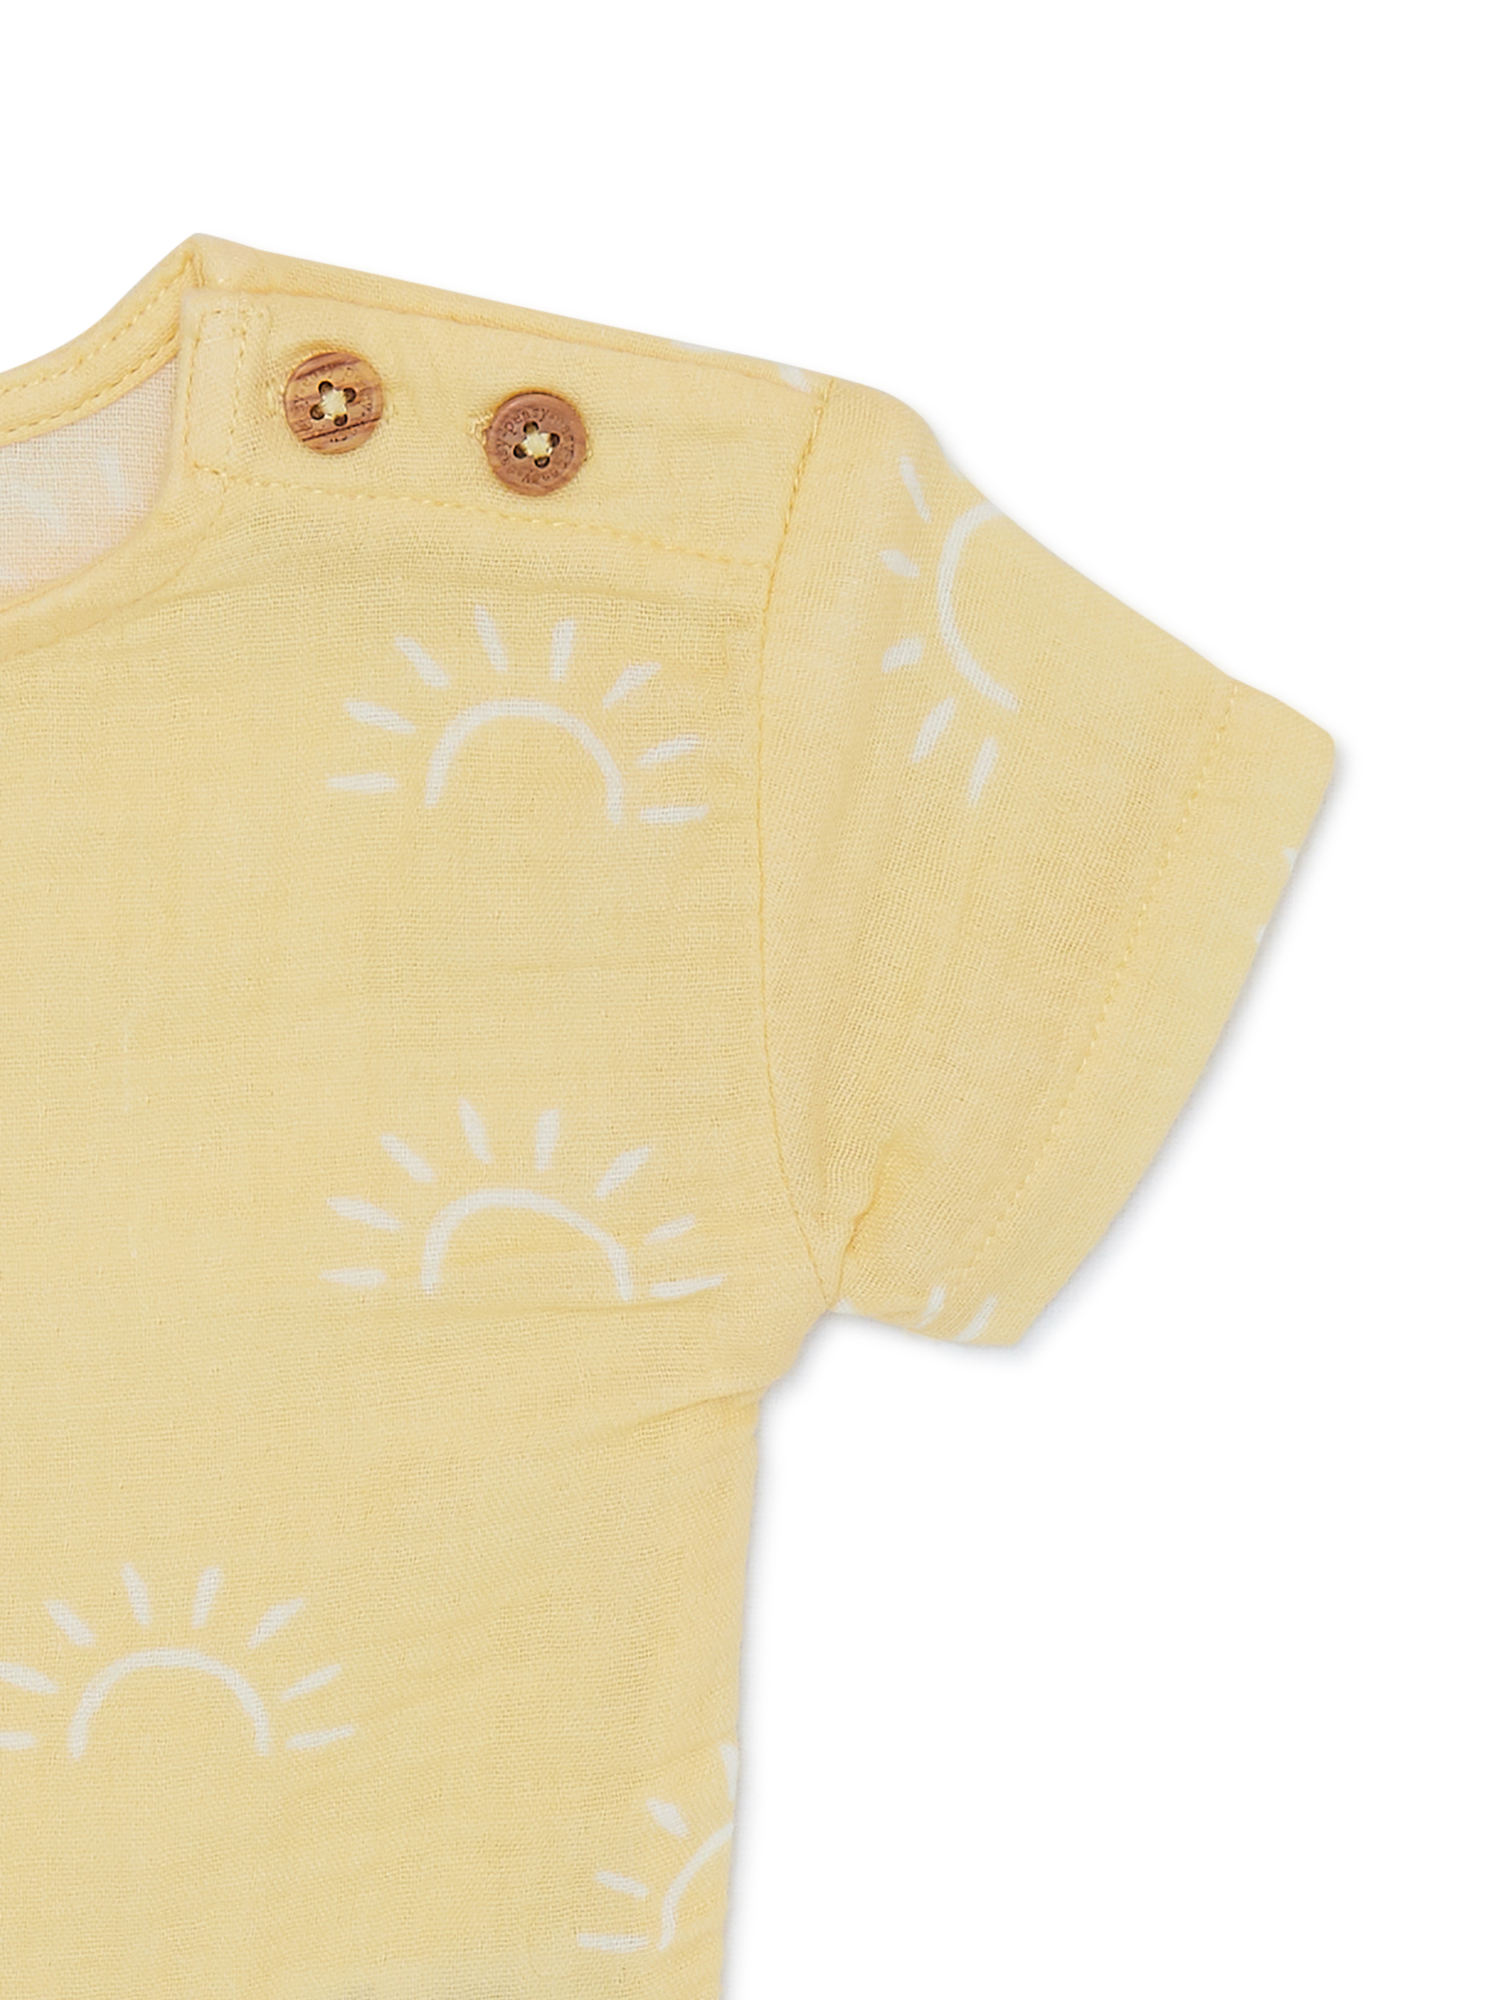 easy-peasy Baby Short Sleeve Print Woven Tee, Sizes 0-24 Months - image 3 of 4